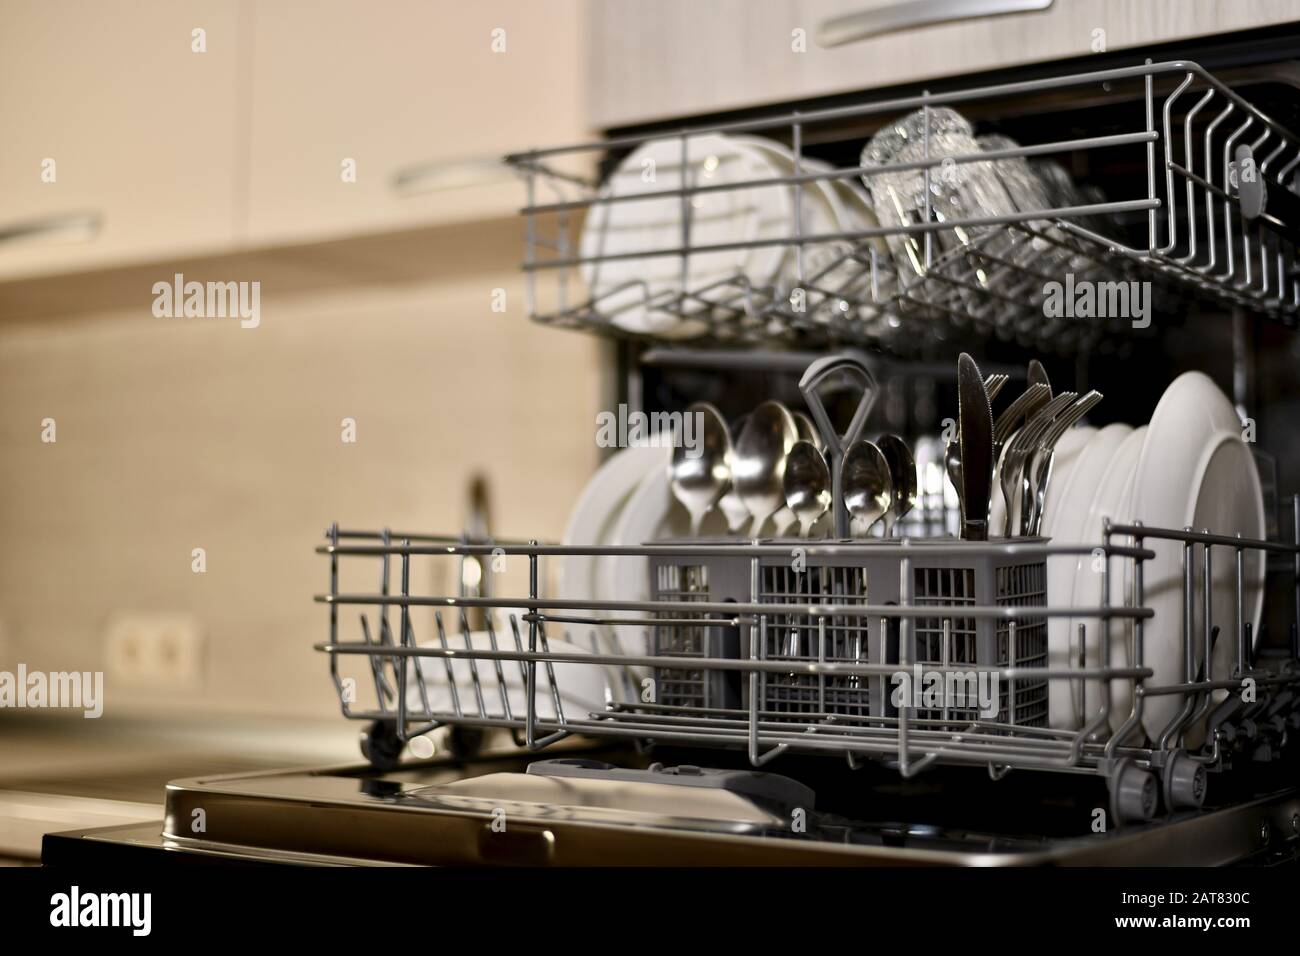 A dishwasher with dishes built in the kitchen cabinet opened an angle view with a perspective and almost complete blur. Stock Photo